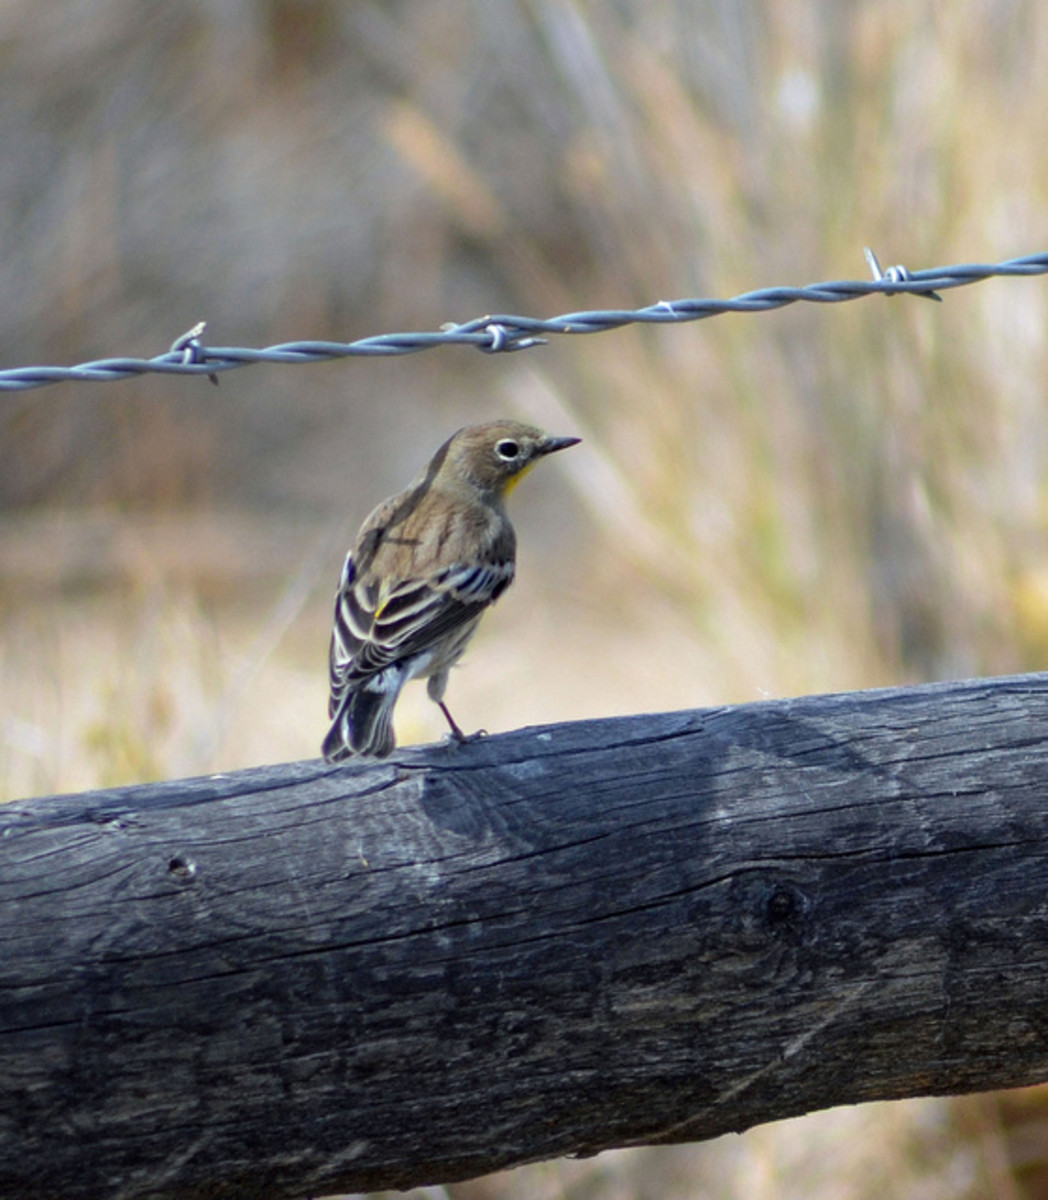 A quiet moment in the feeding frenzy, the warbler sits on a fence post.